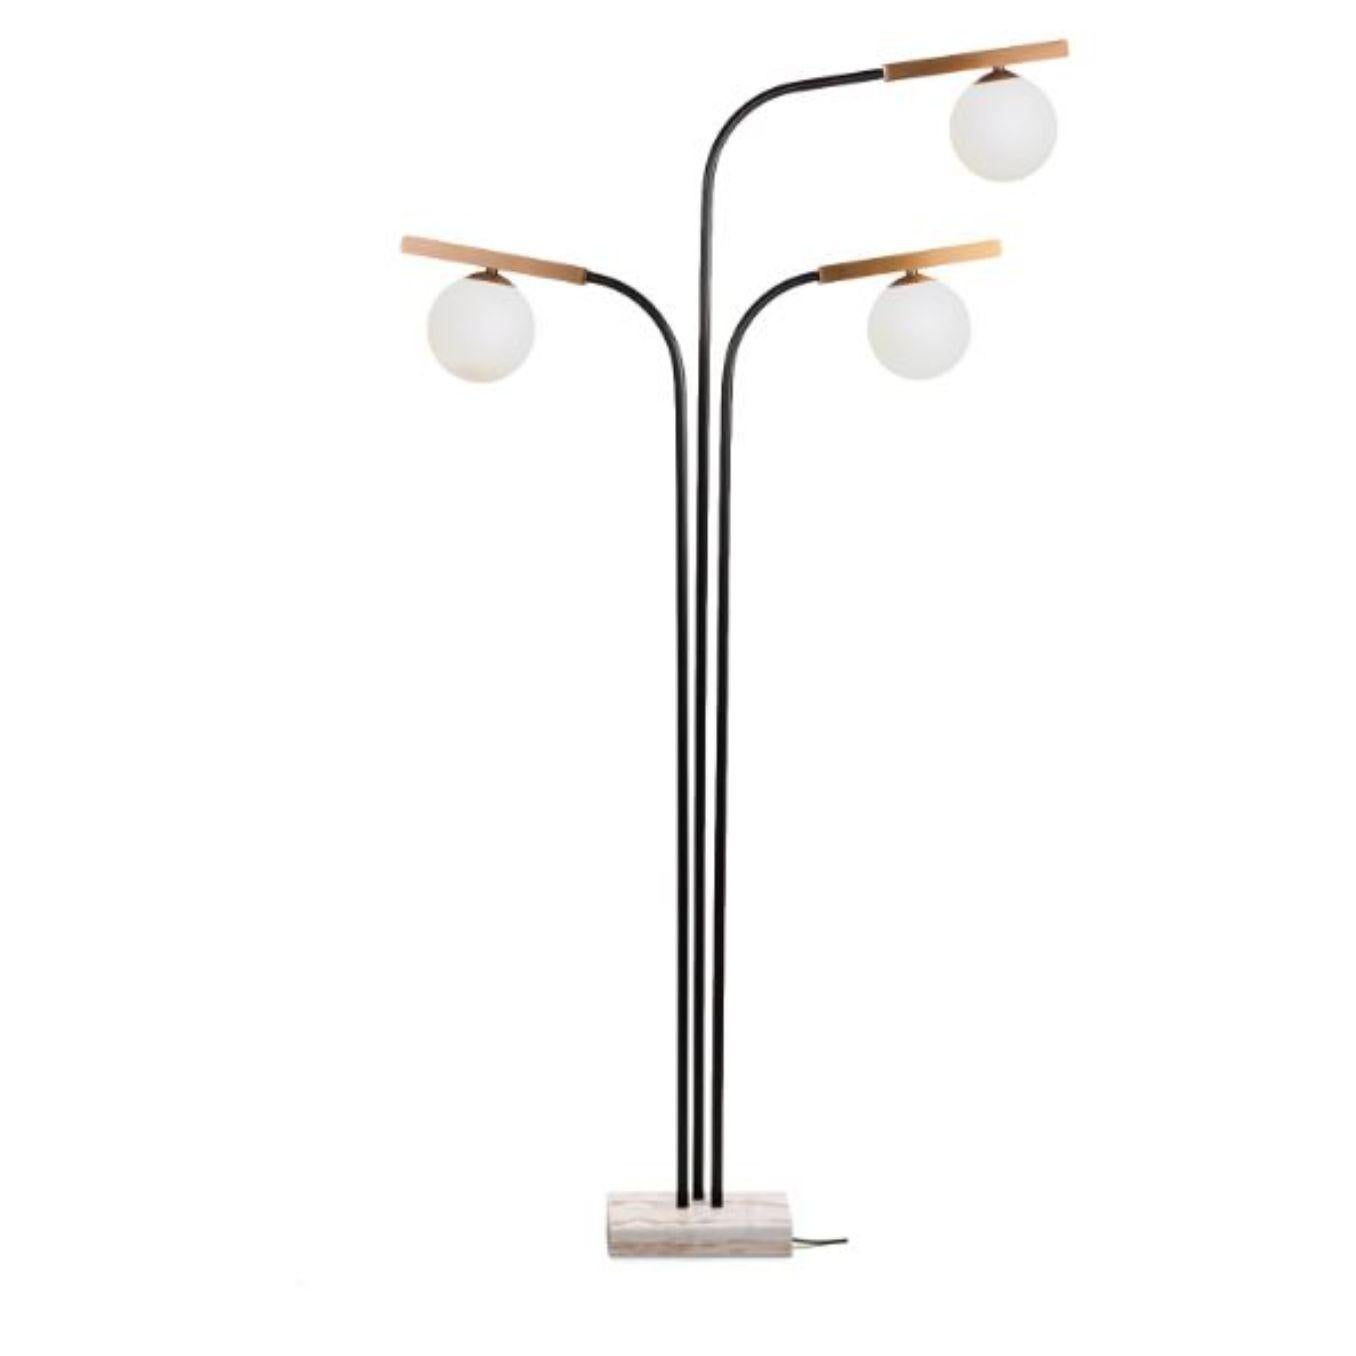 Bronze globe floor lamp with marble base by Dooq
Dimensions: W 96 x D 20 x H 174 cm
Materials: lacquered metal, polished or brushed metal, bronze, marble.
Also available in different colours and materials. 

Information:
230V/50Hz
3 x max.